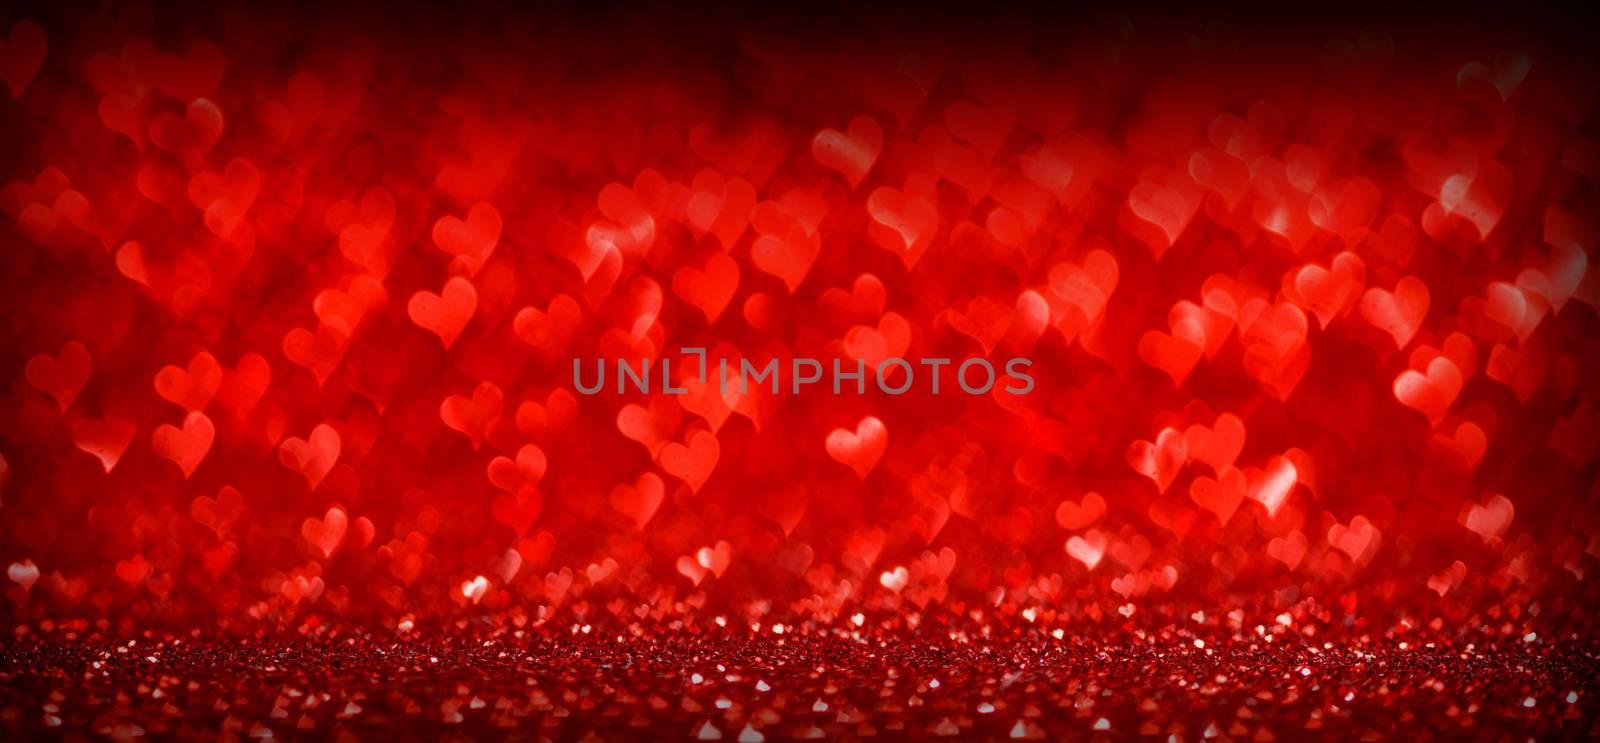 Red glowing bokeh hearts background for Valentines day